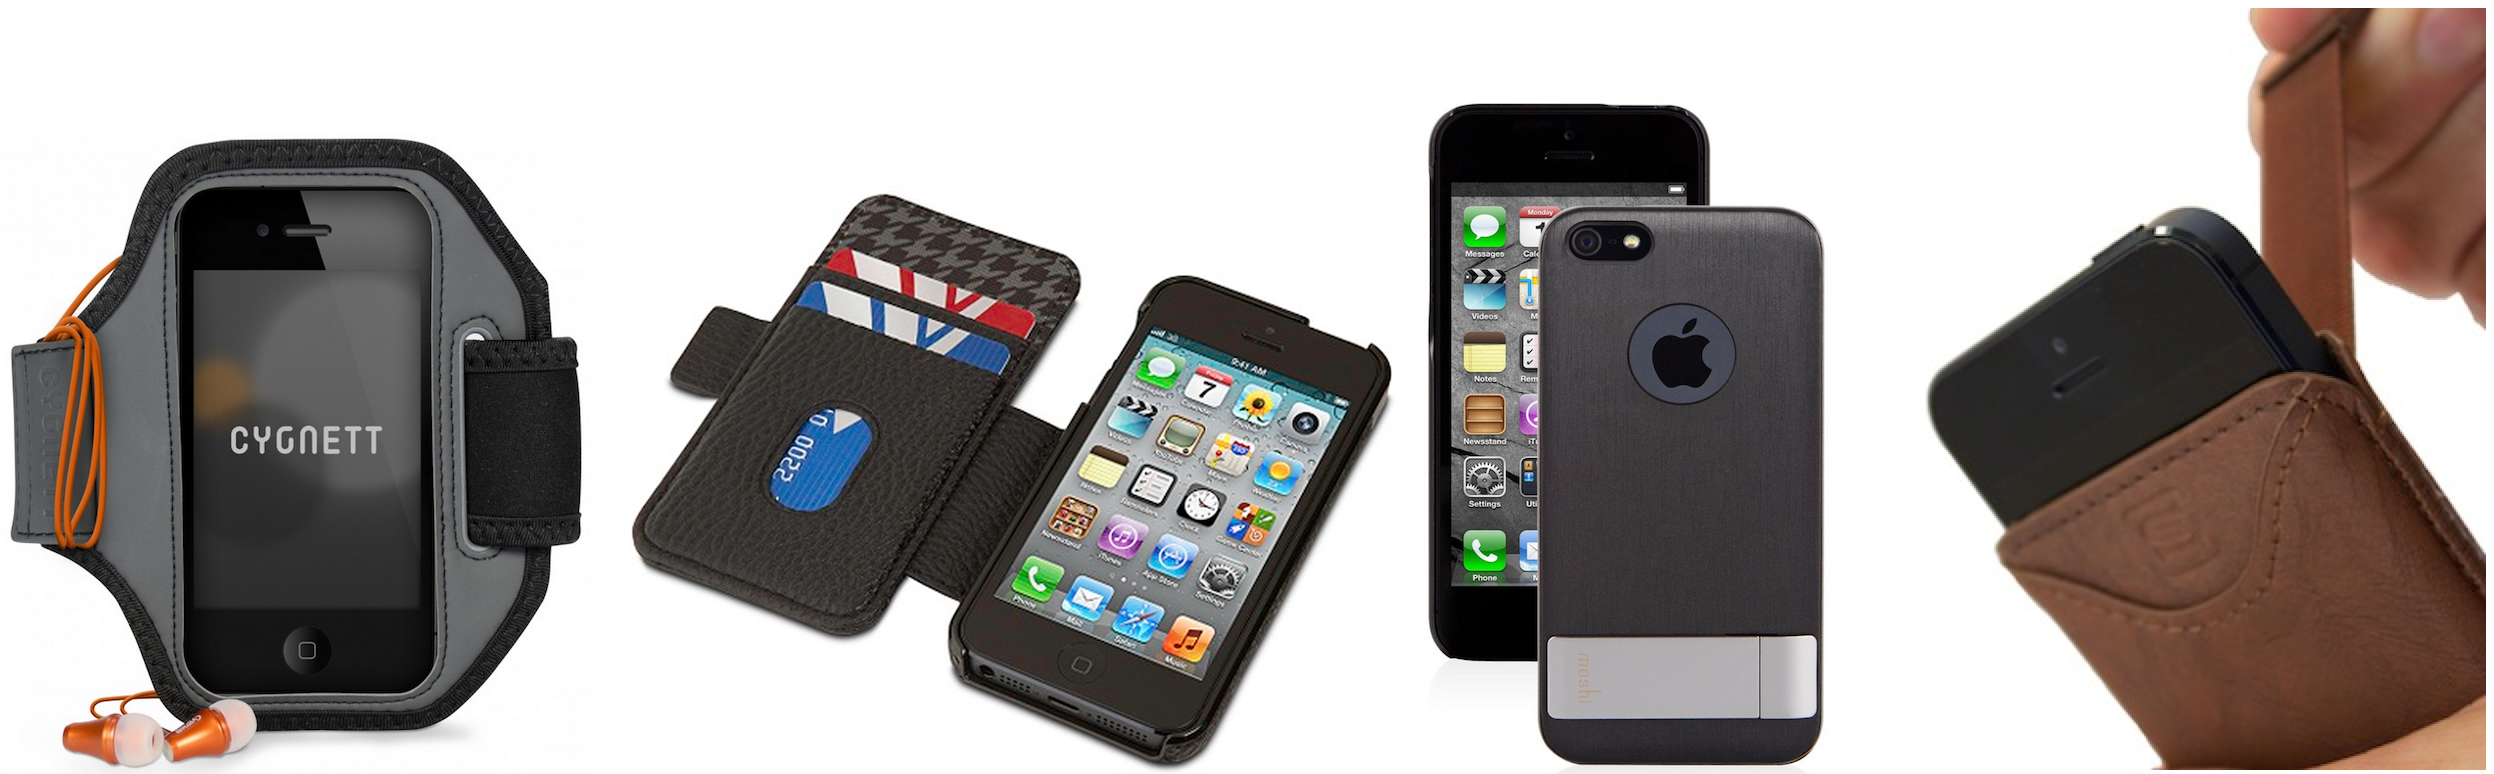 iPhone 5 gift guide cases